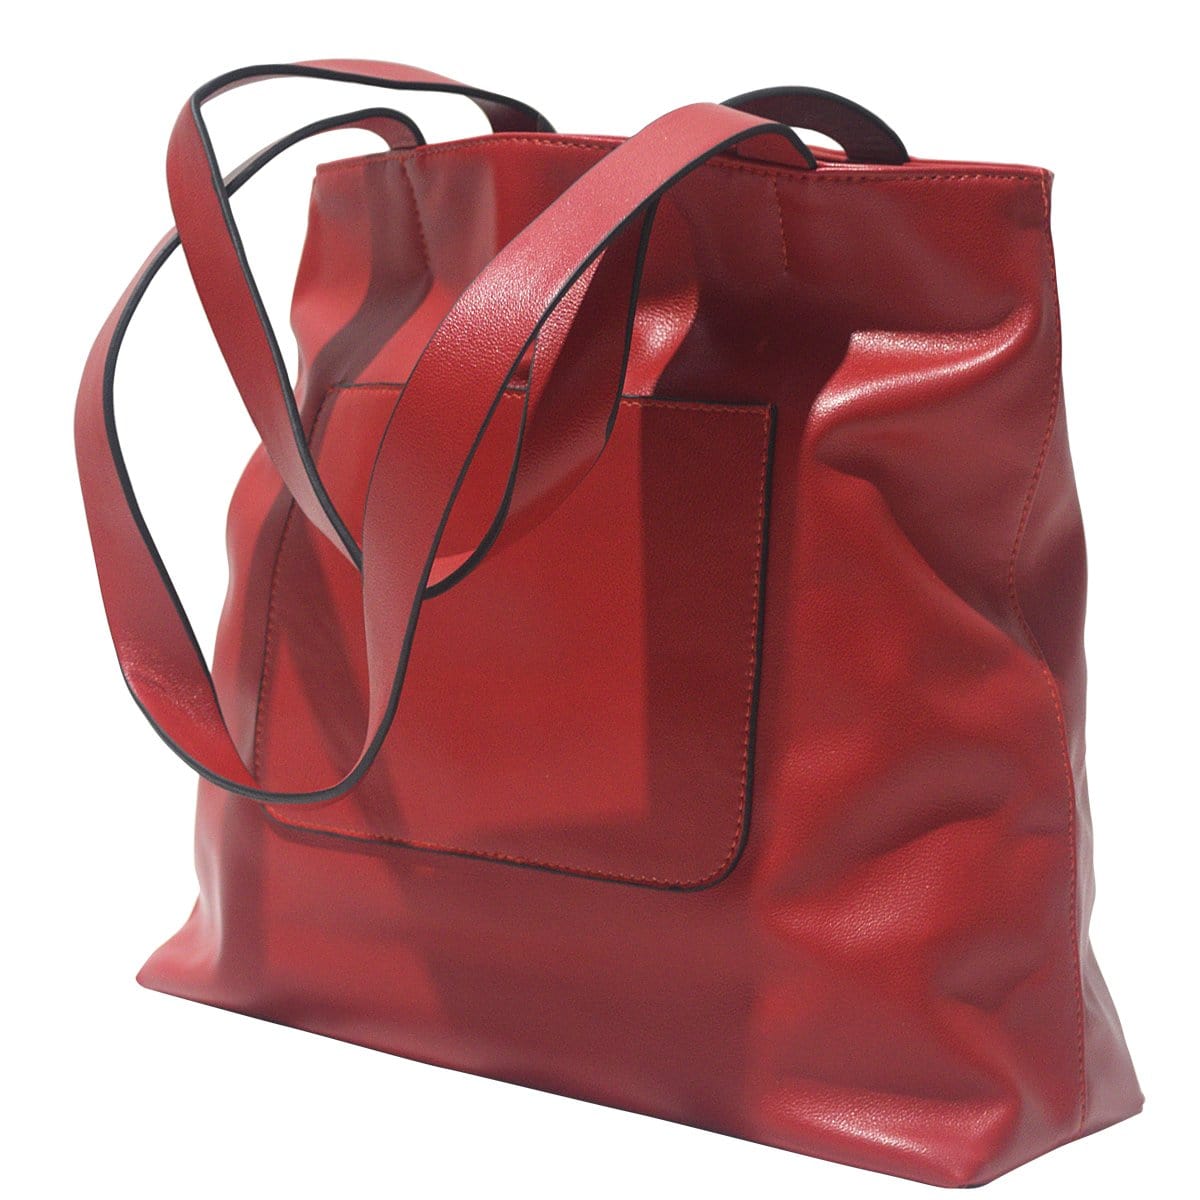 Pocket Tote - Red Leather Look